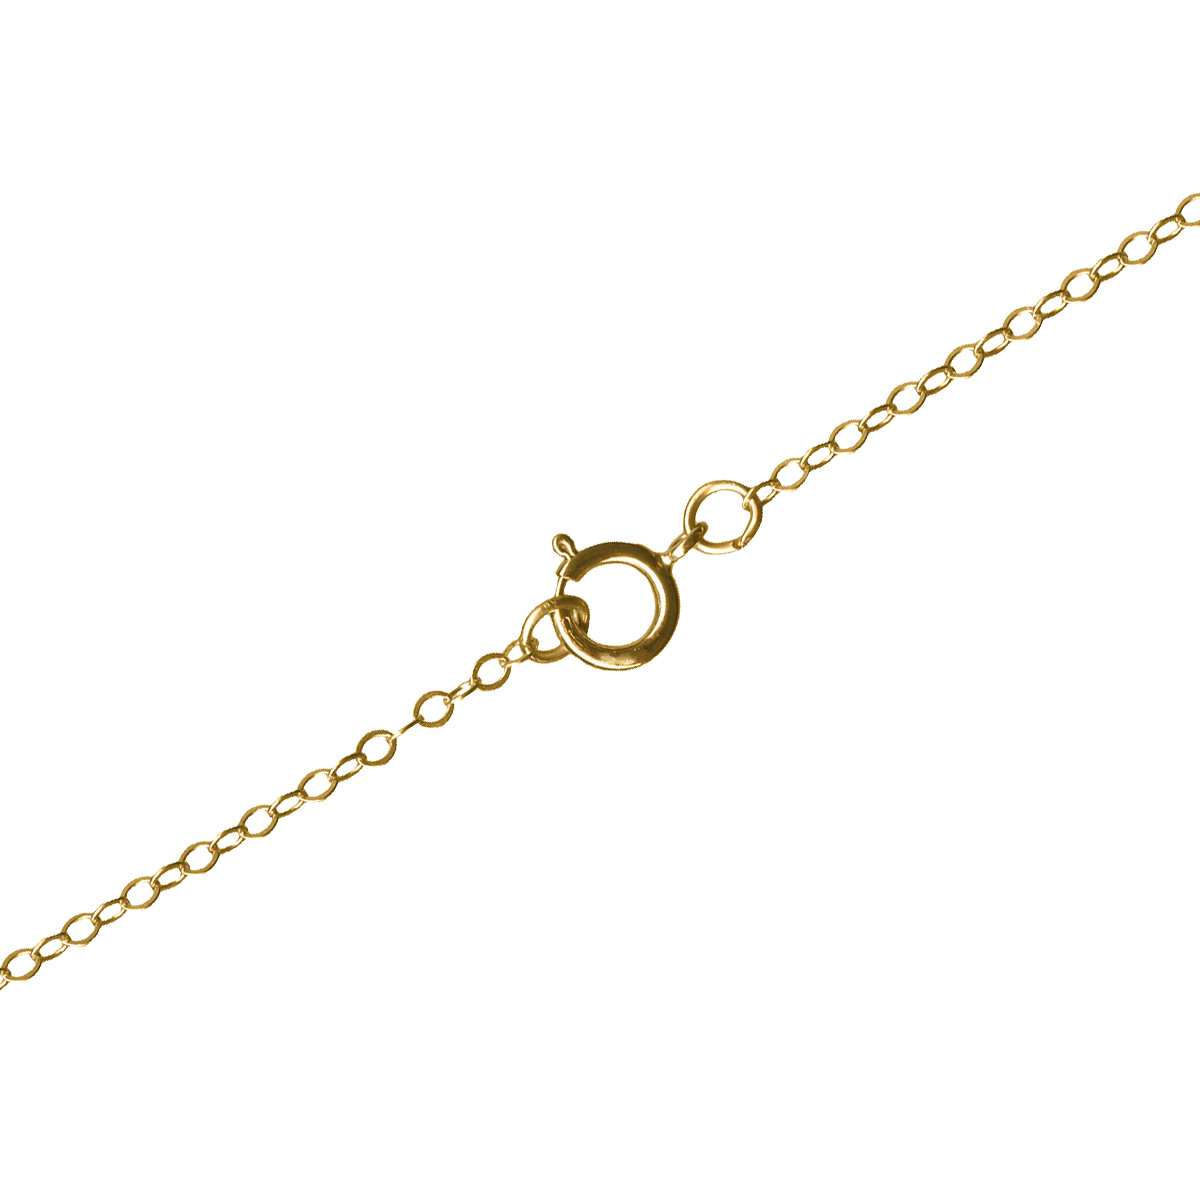 jewelry chain 1/20, 14kt gold-filled cable chain necklace, 20 YJRLZTW